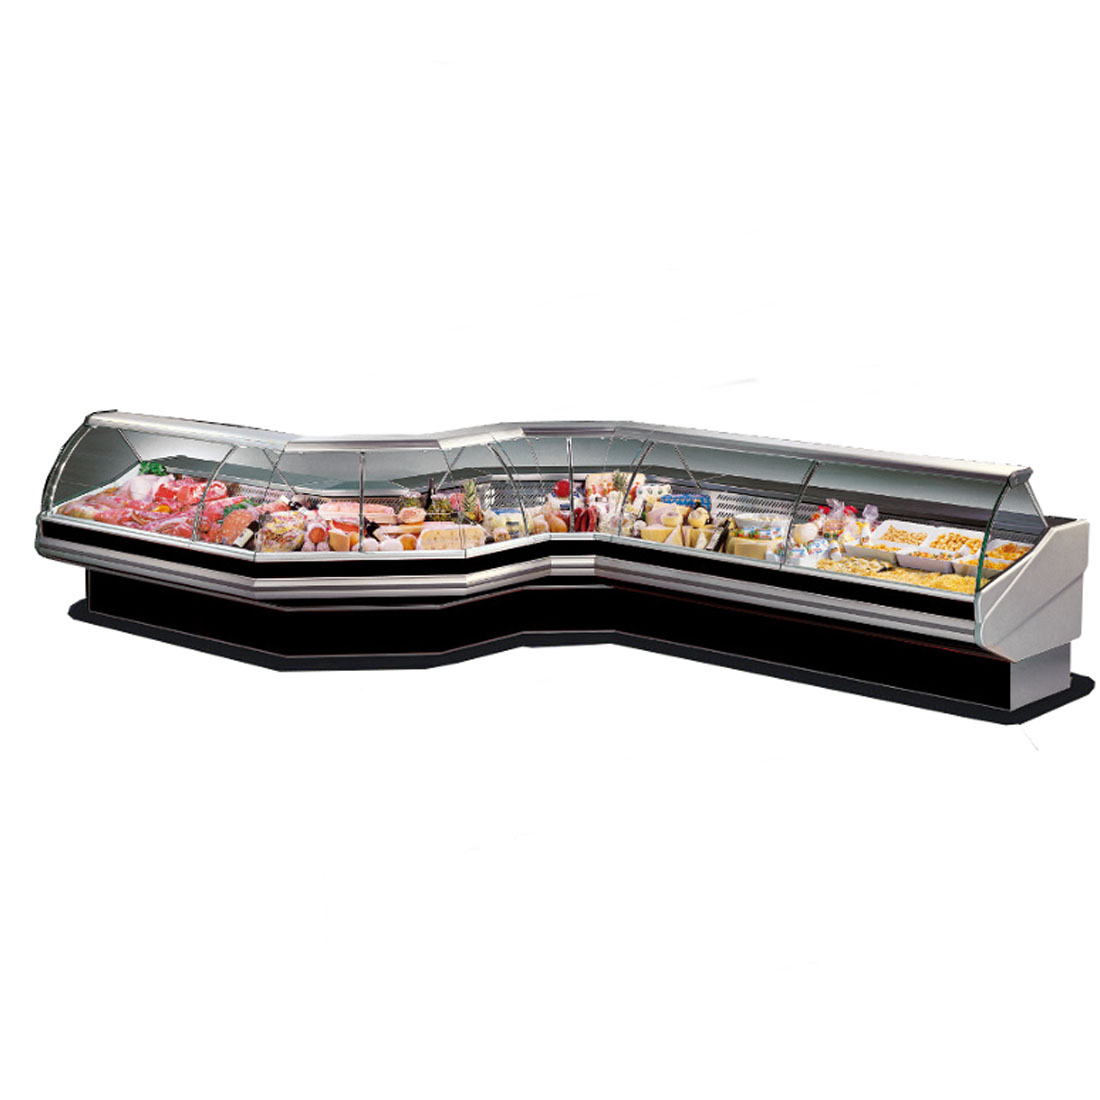 Coner External Glass - CURVED FRONT GLASS DELI DISPLAY - CN90E